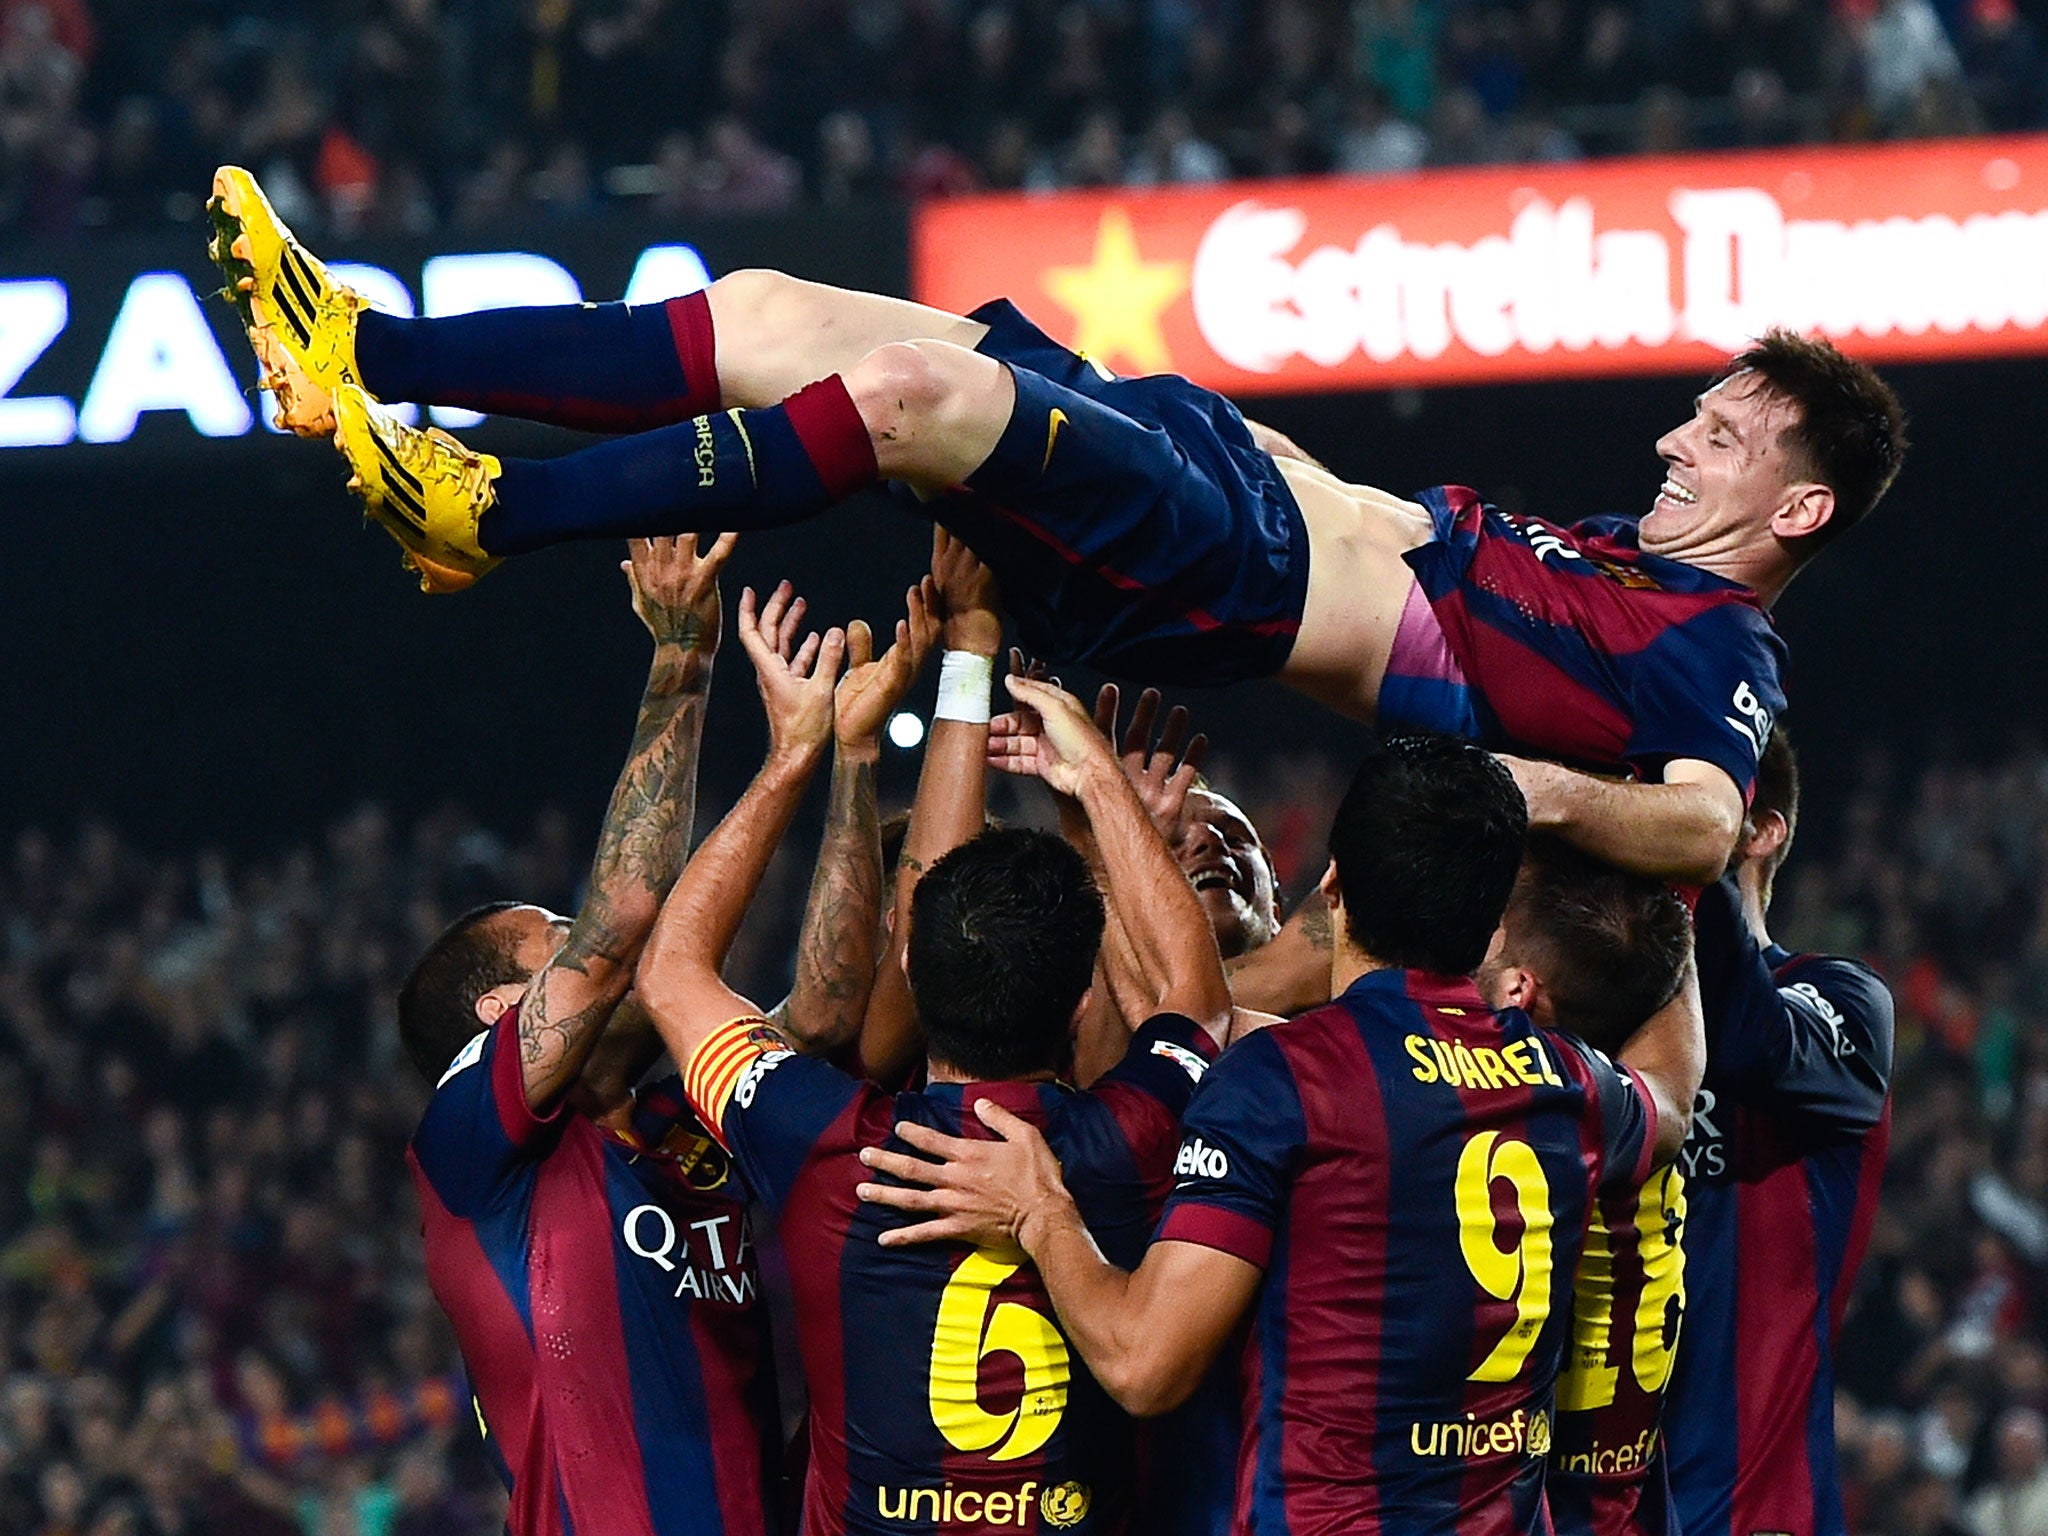 Barcelona players lift up their team-mate Lionel Messi in celebration of his new La Liga goalscoring record